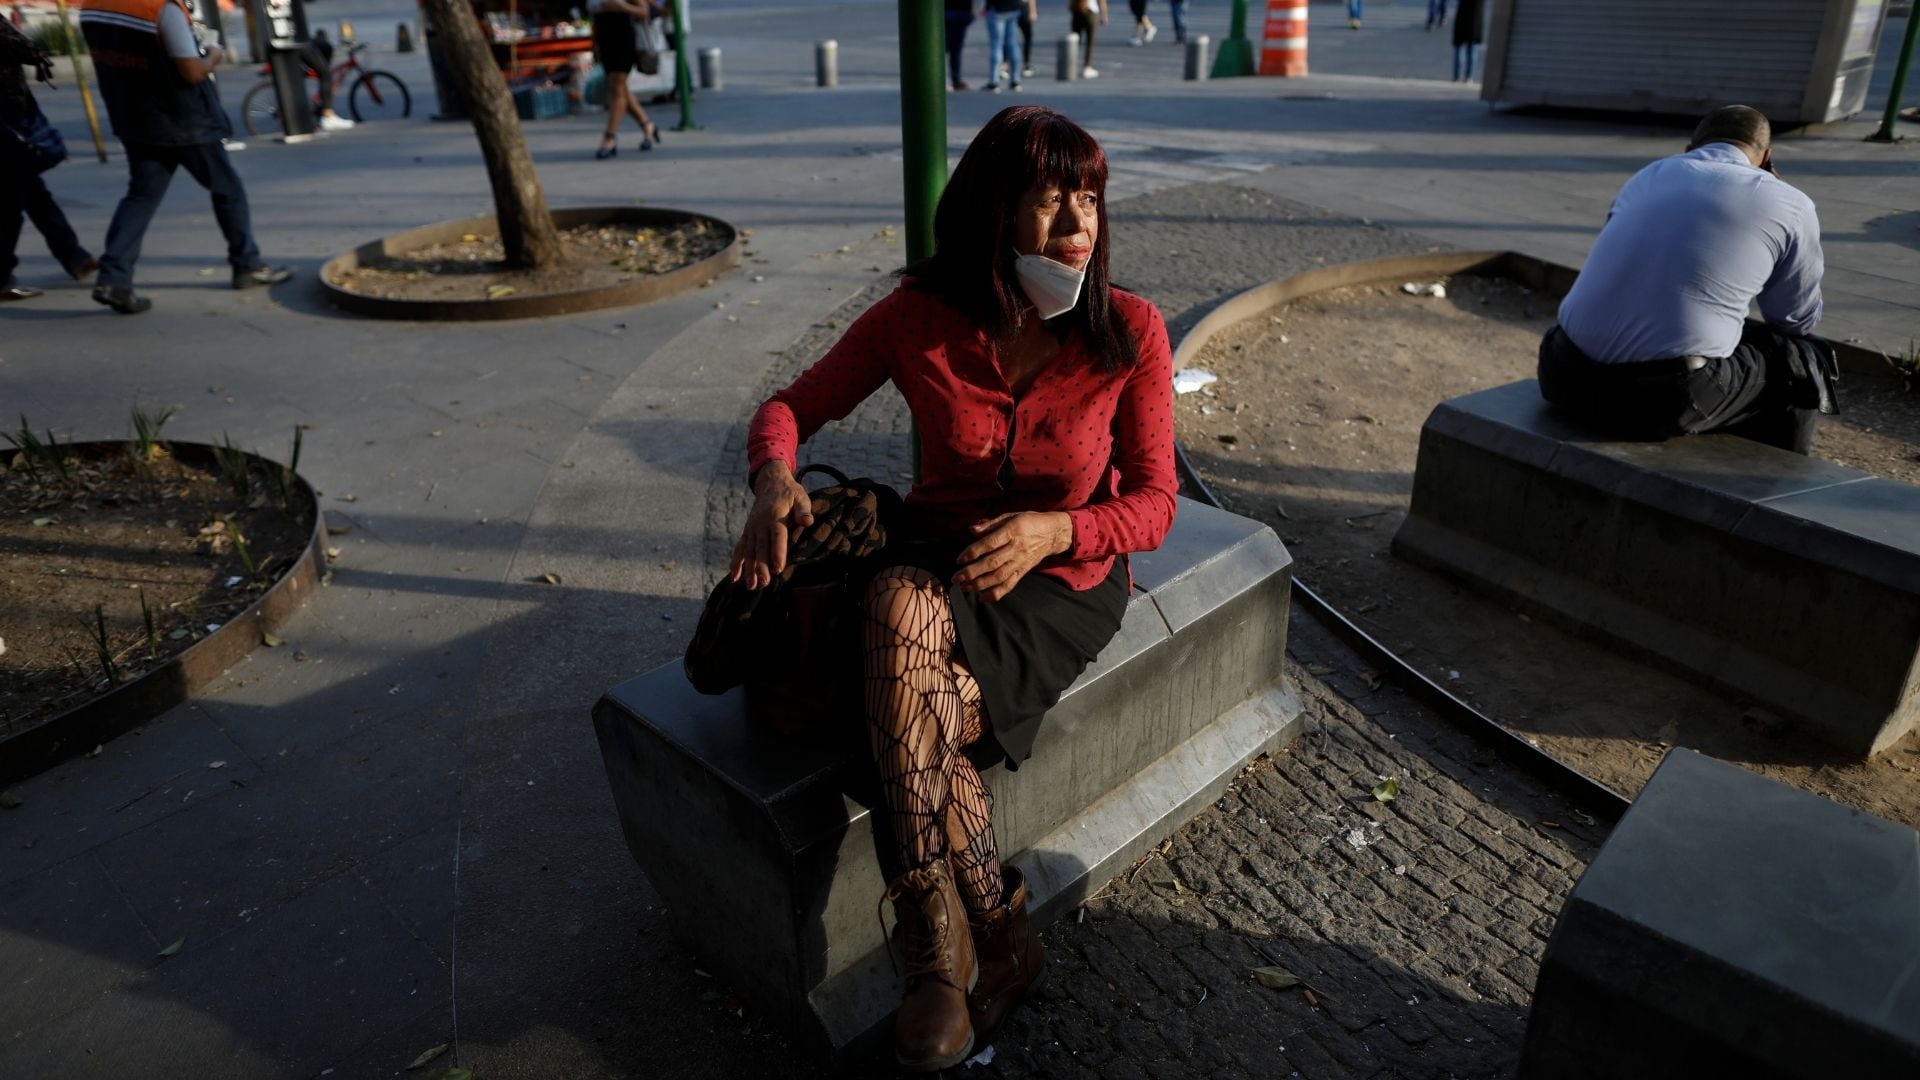 MexicoSexWorkers12